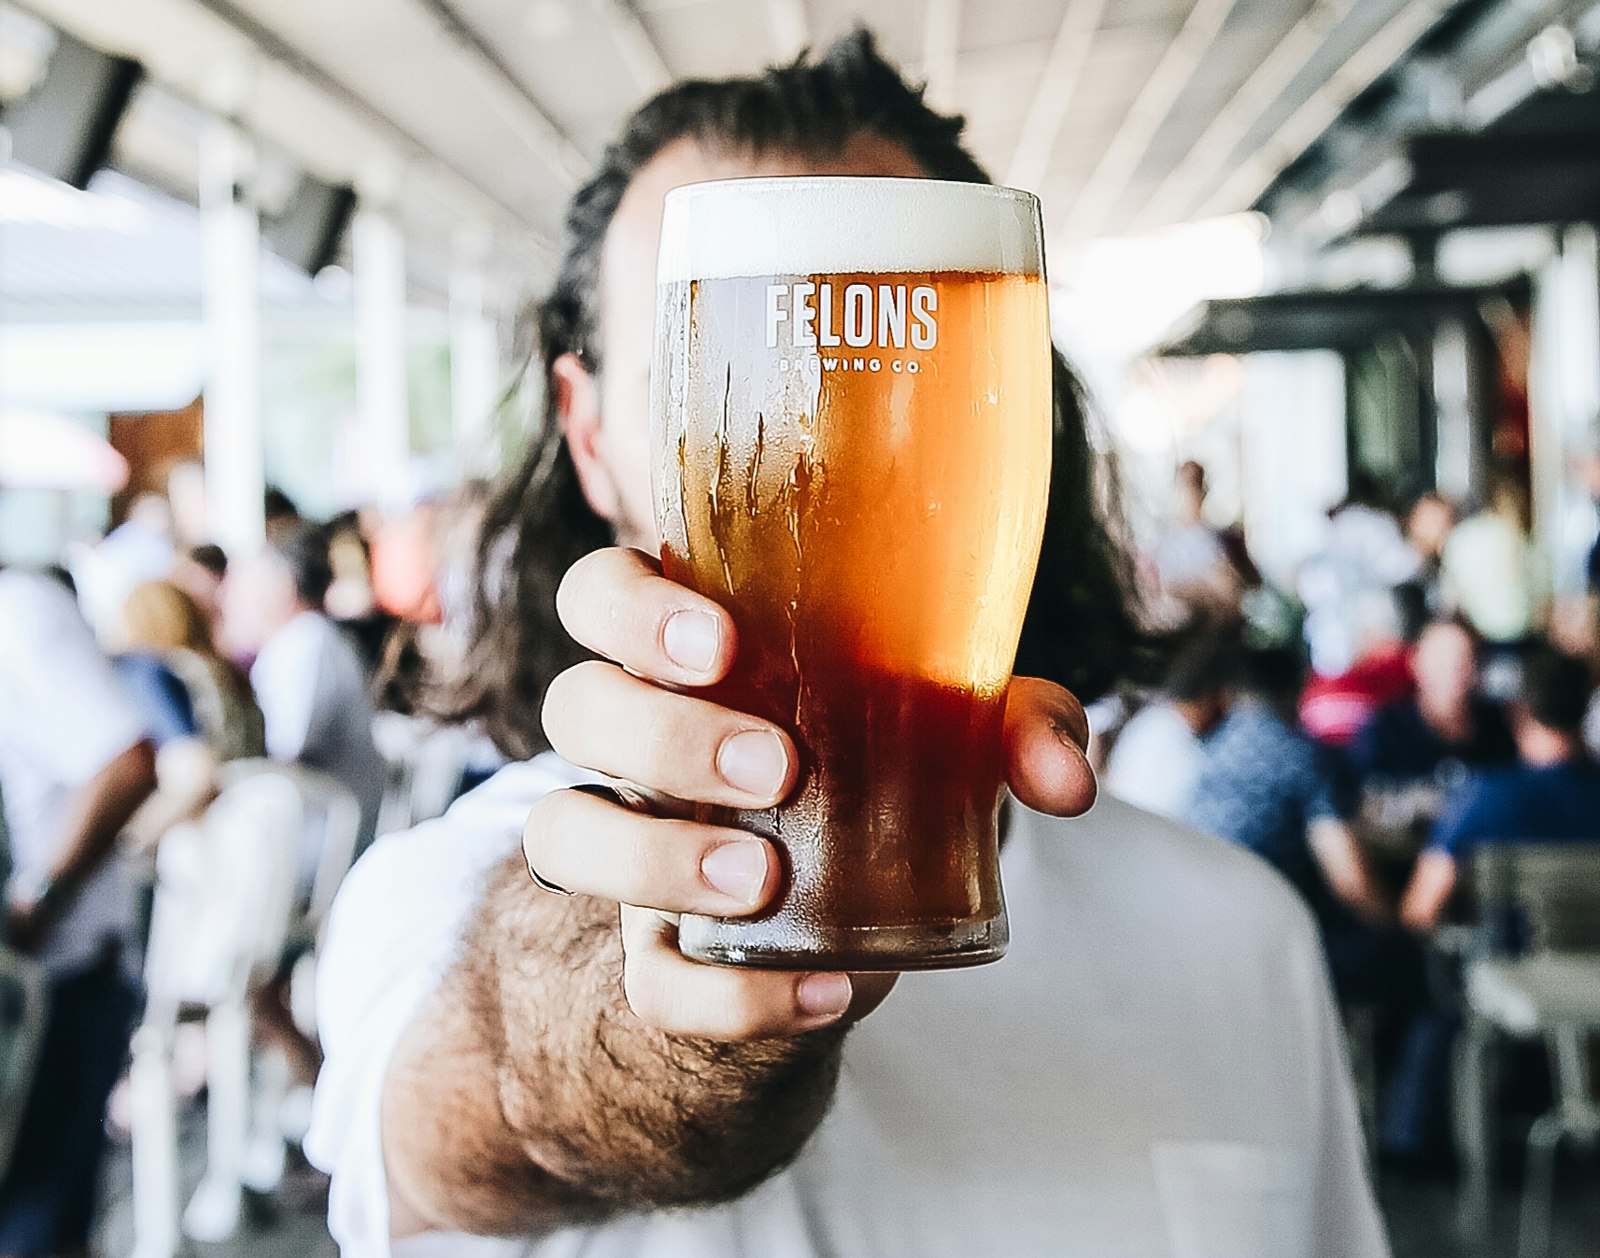 A man's outstretched hand holds a pint of beer up to the camera lens, obscuring his face behind the glass.